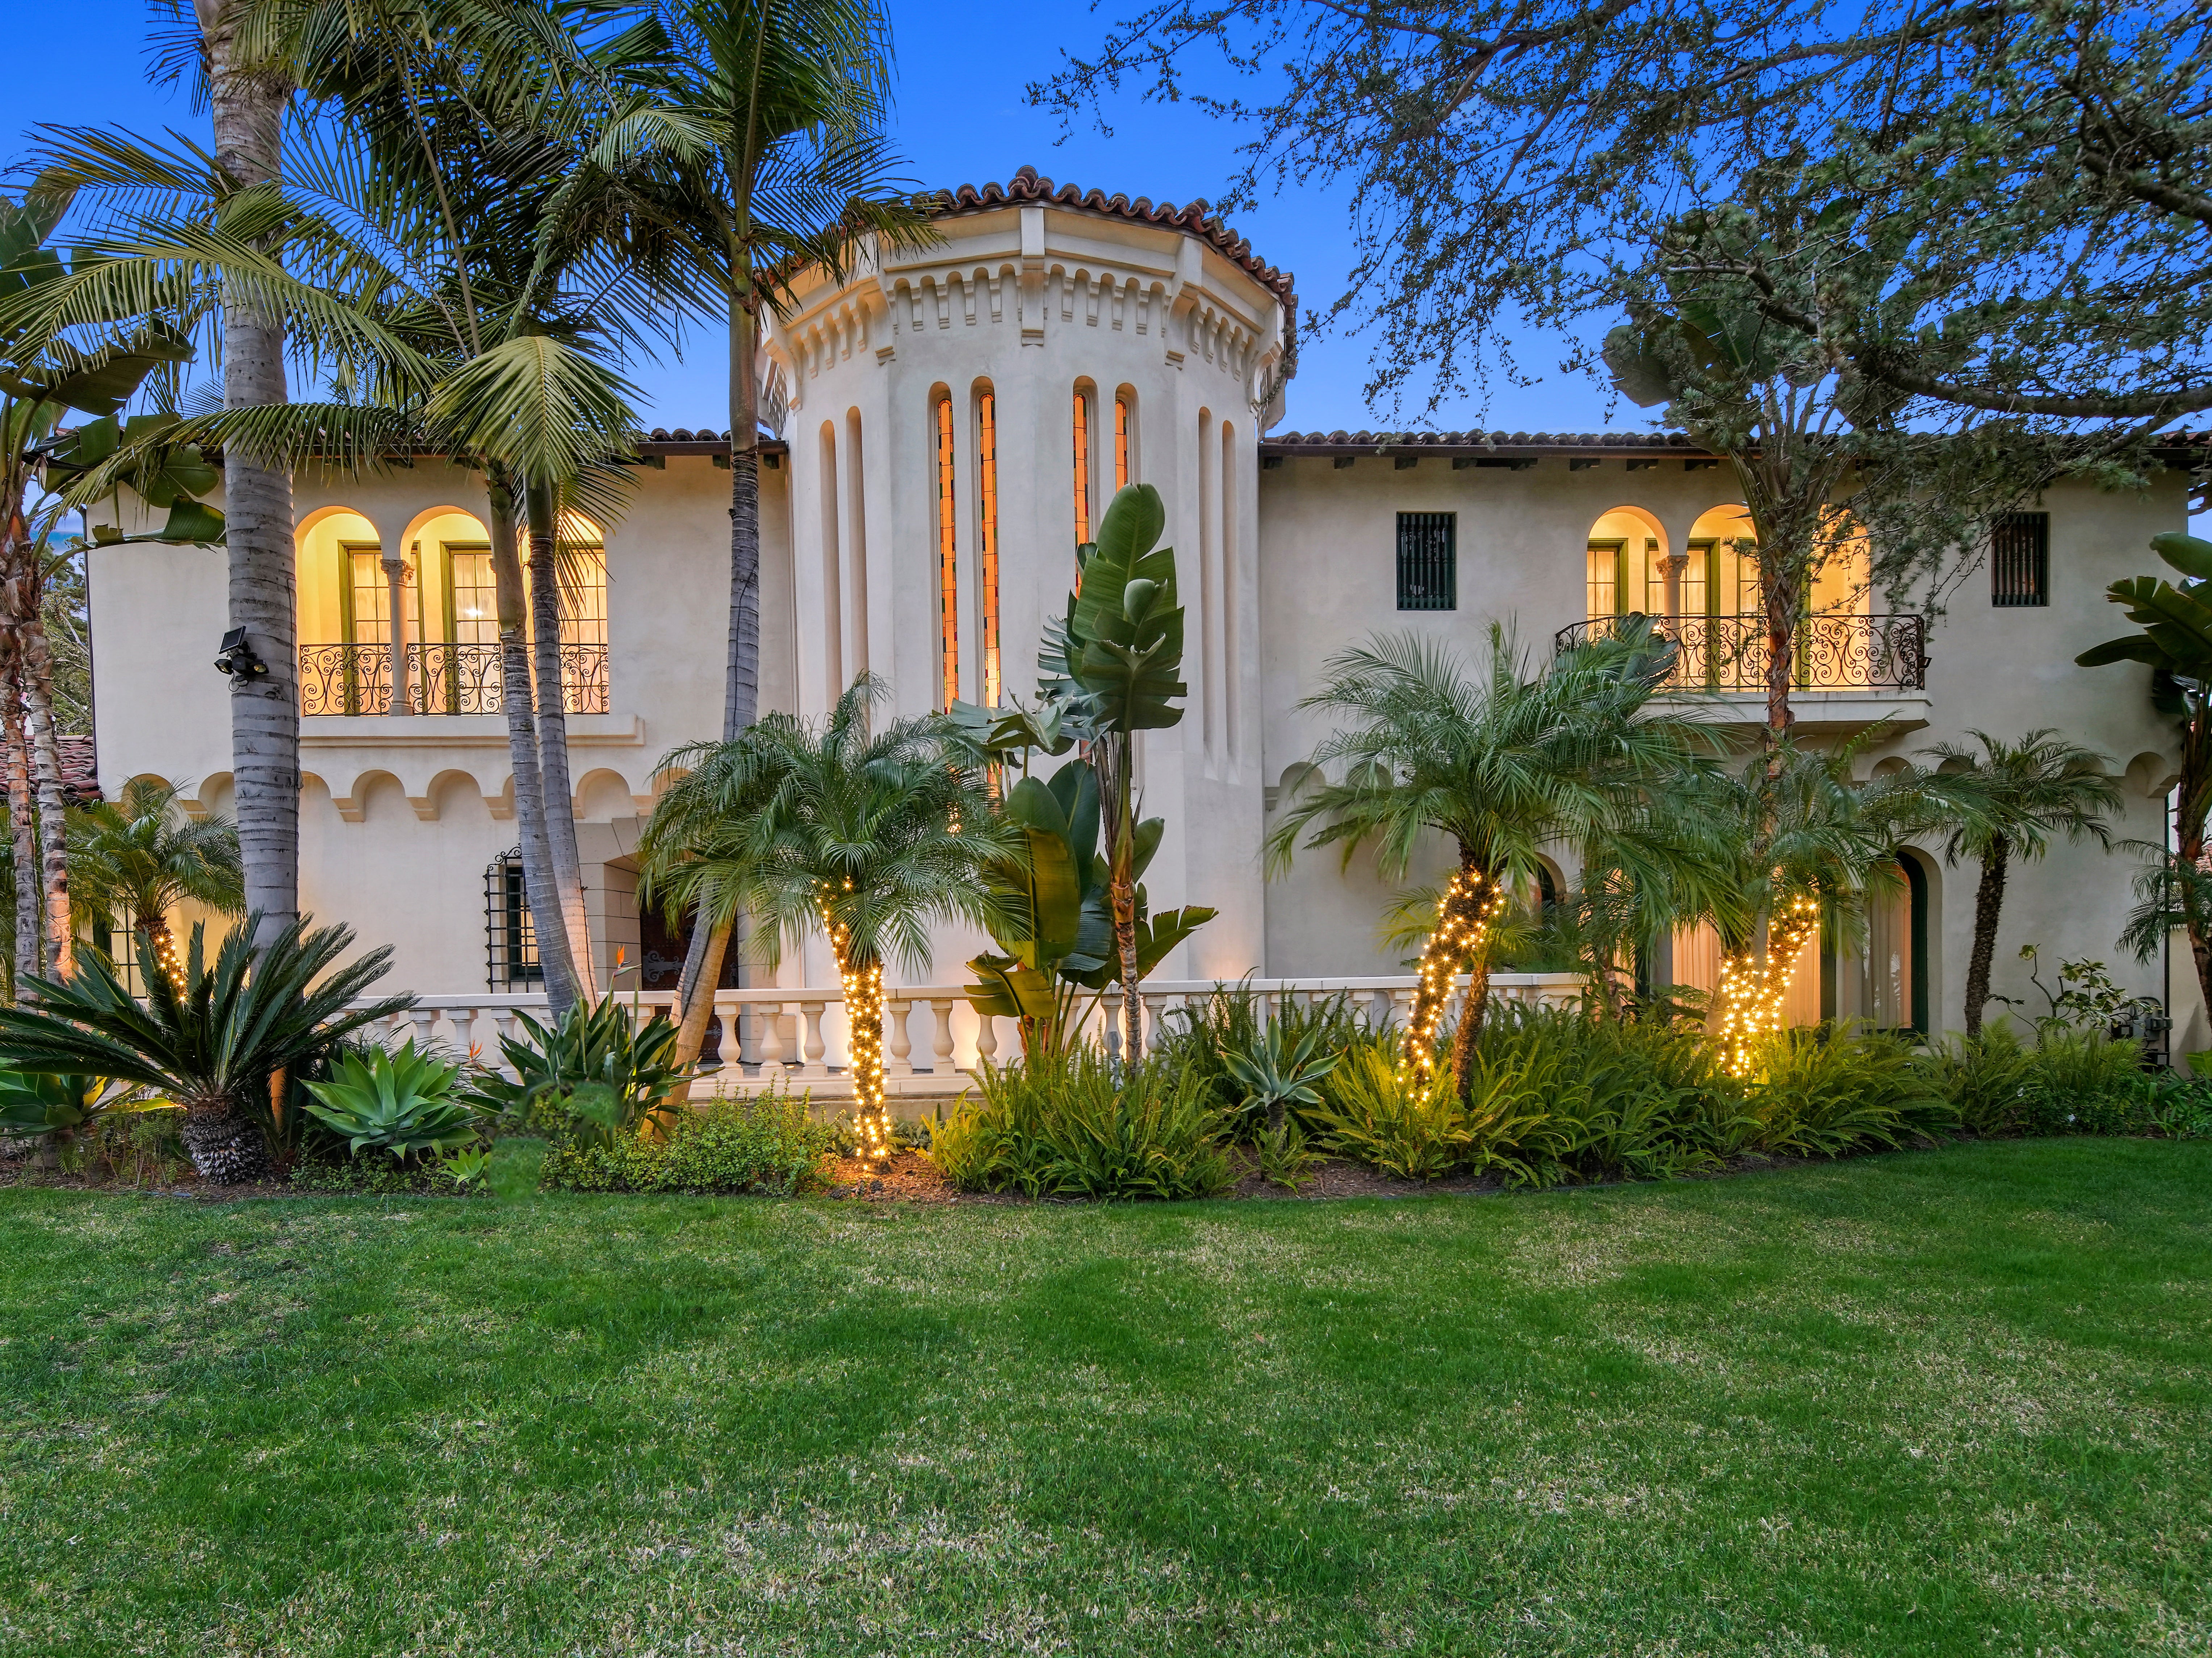 The stunning Spanish Colonial style property in Beverly Hills where Bugsy Siegel was killed which is now available to buy